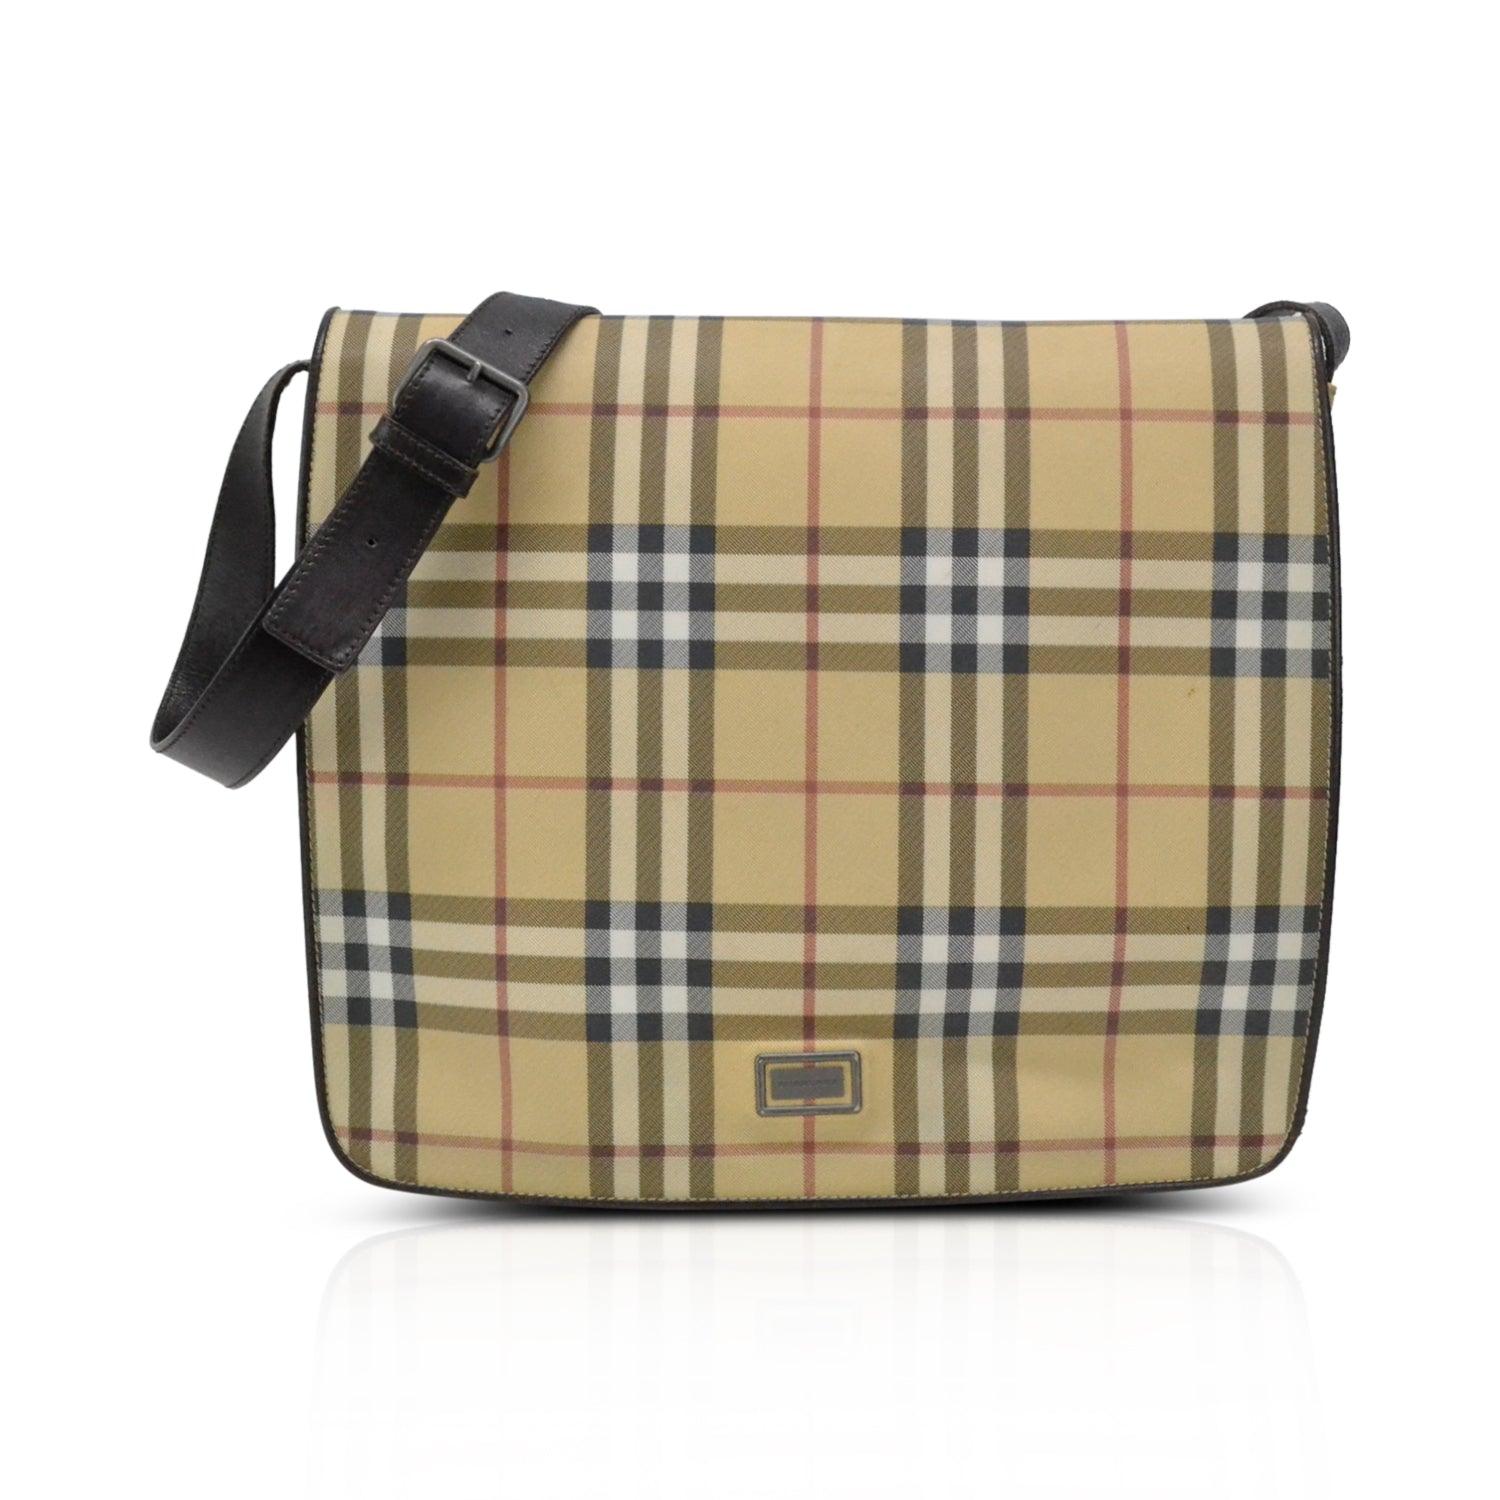 Burberry Messenger Bag - Fashionably Yours